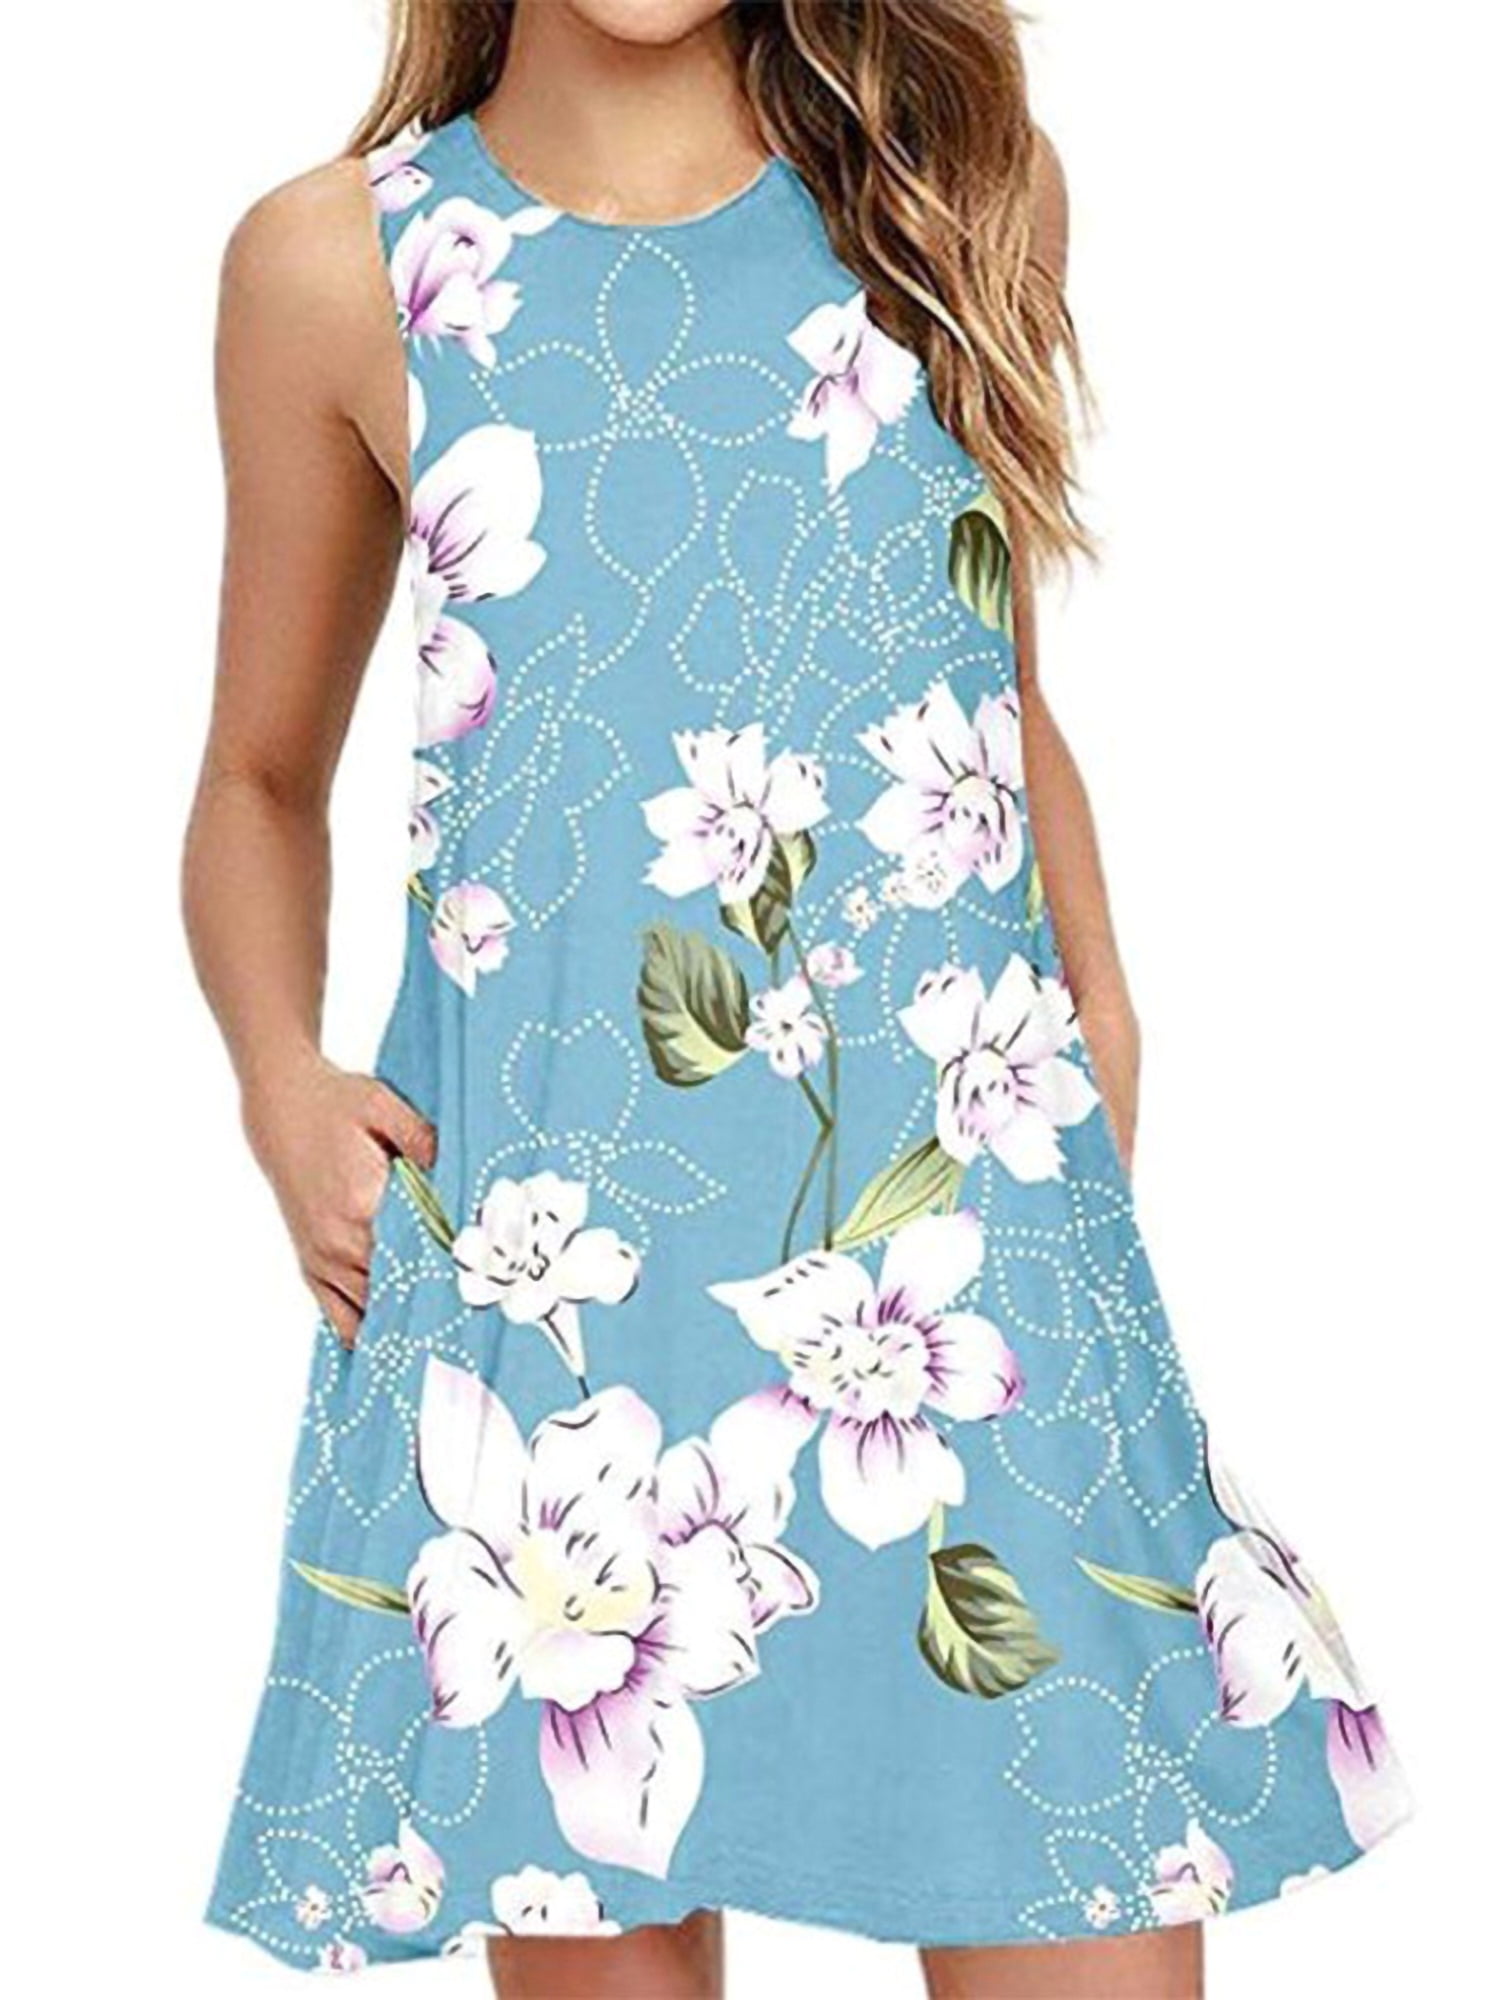 Moent Floral Print Dresses for Women Womens Casual Sleeveless Bohe Loose Camisole Dress Ladies Flowy Swing Summer Dress 